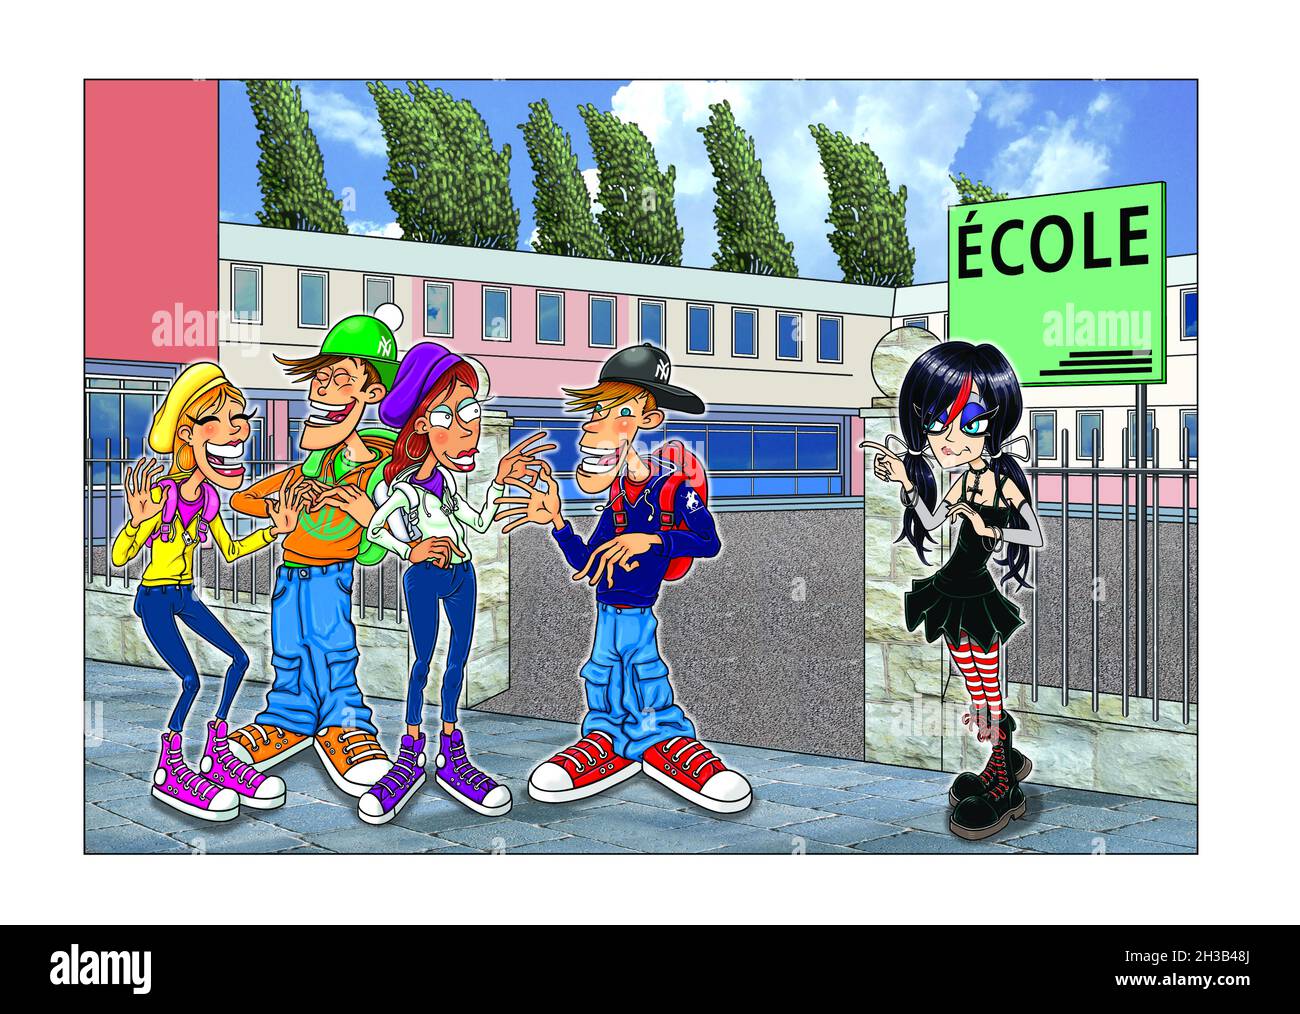 Mixed-media art illustration Goth girl + casually dressed teenagers outside schools/educational establishments in France. New kid in school, in-crowd. Stock Photo